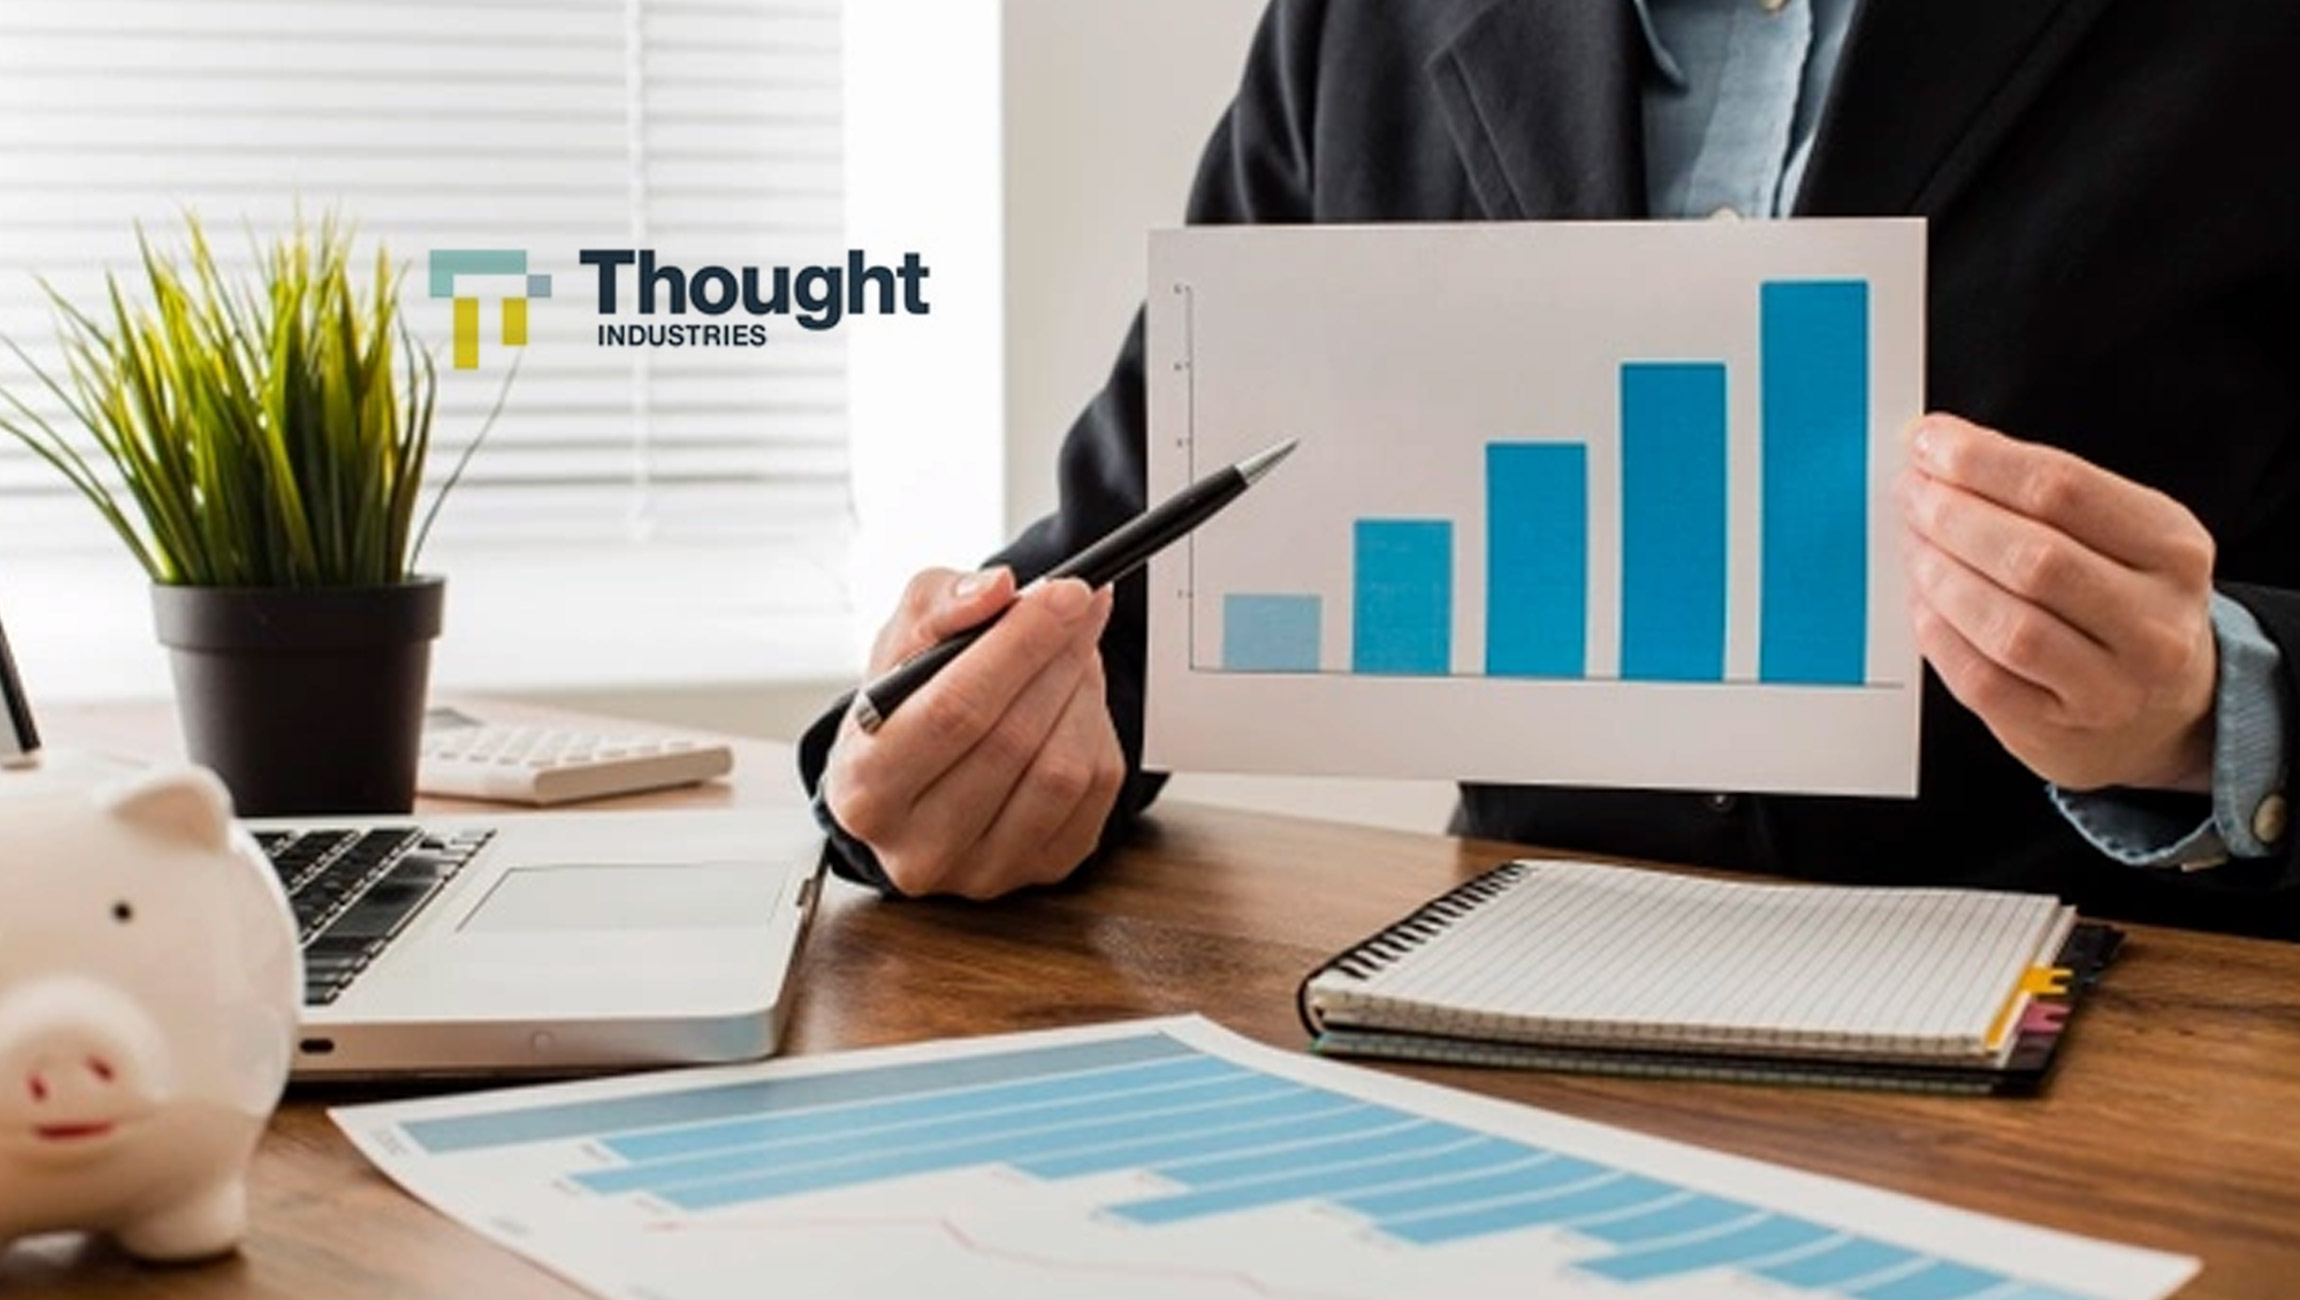 Thought Industries Achieves Record Q1 Revenue Growth Fueled By Enterprise Demand For Customer Learning Technology and Best-Practice Strategies